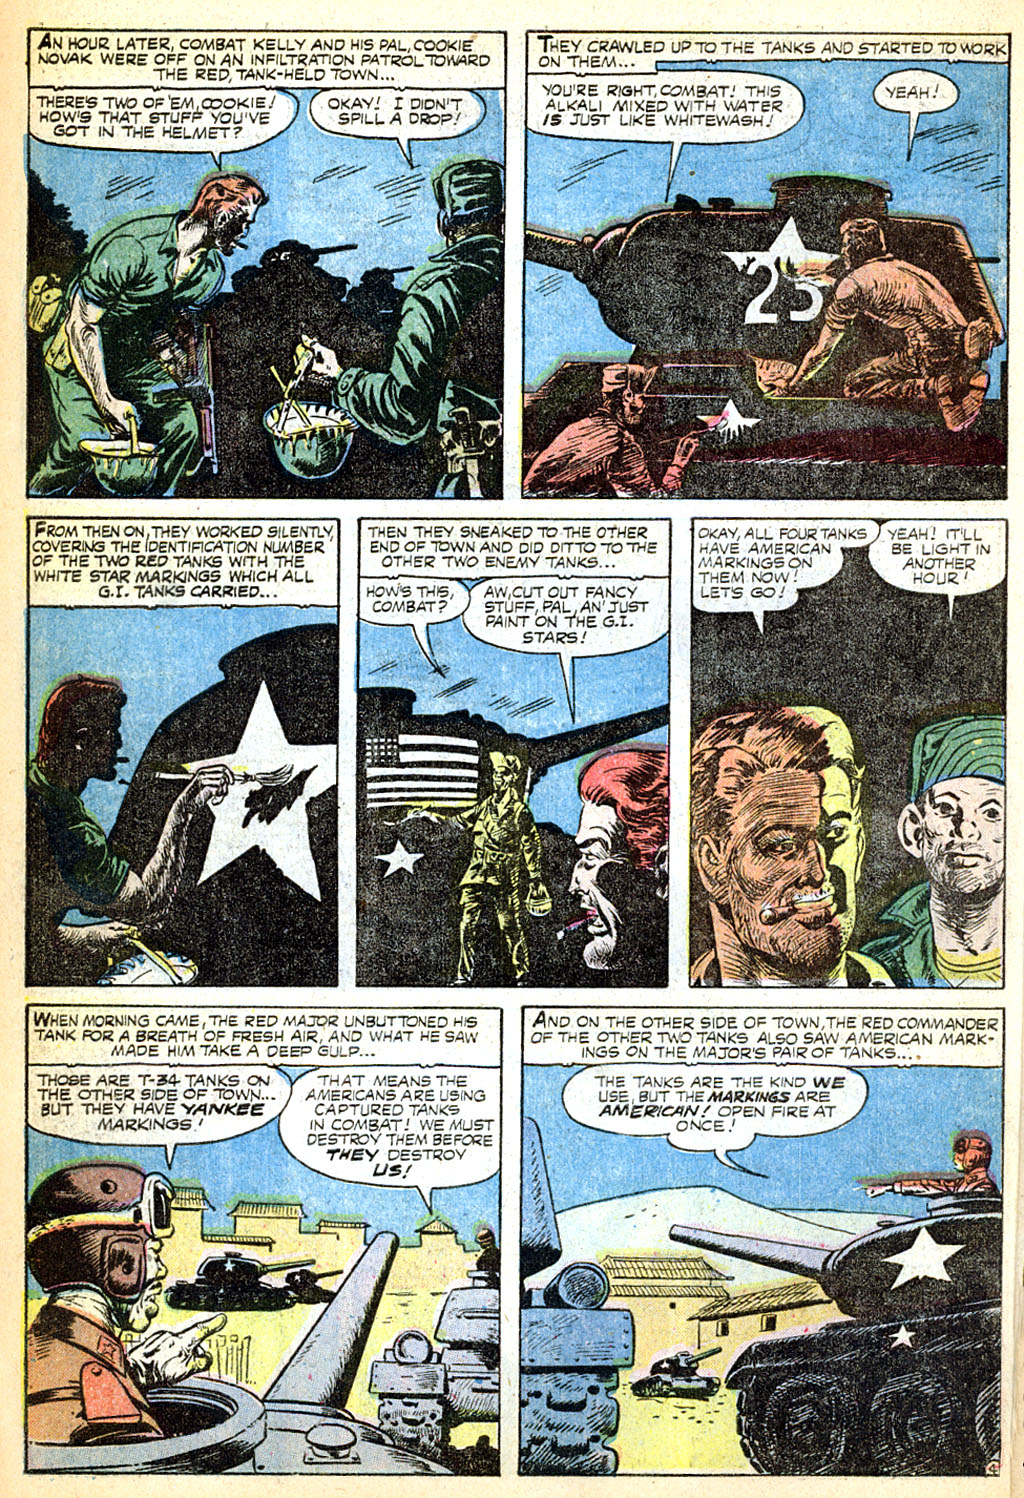 Read online Combat Kelly (1951) comic -  Issue #41 - 6